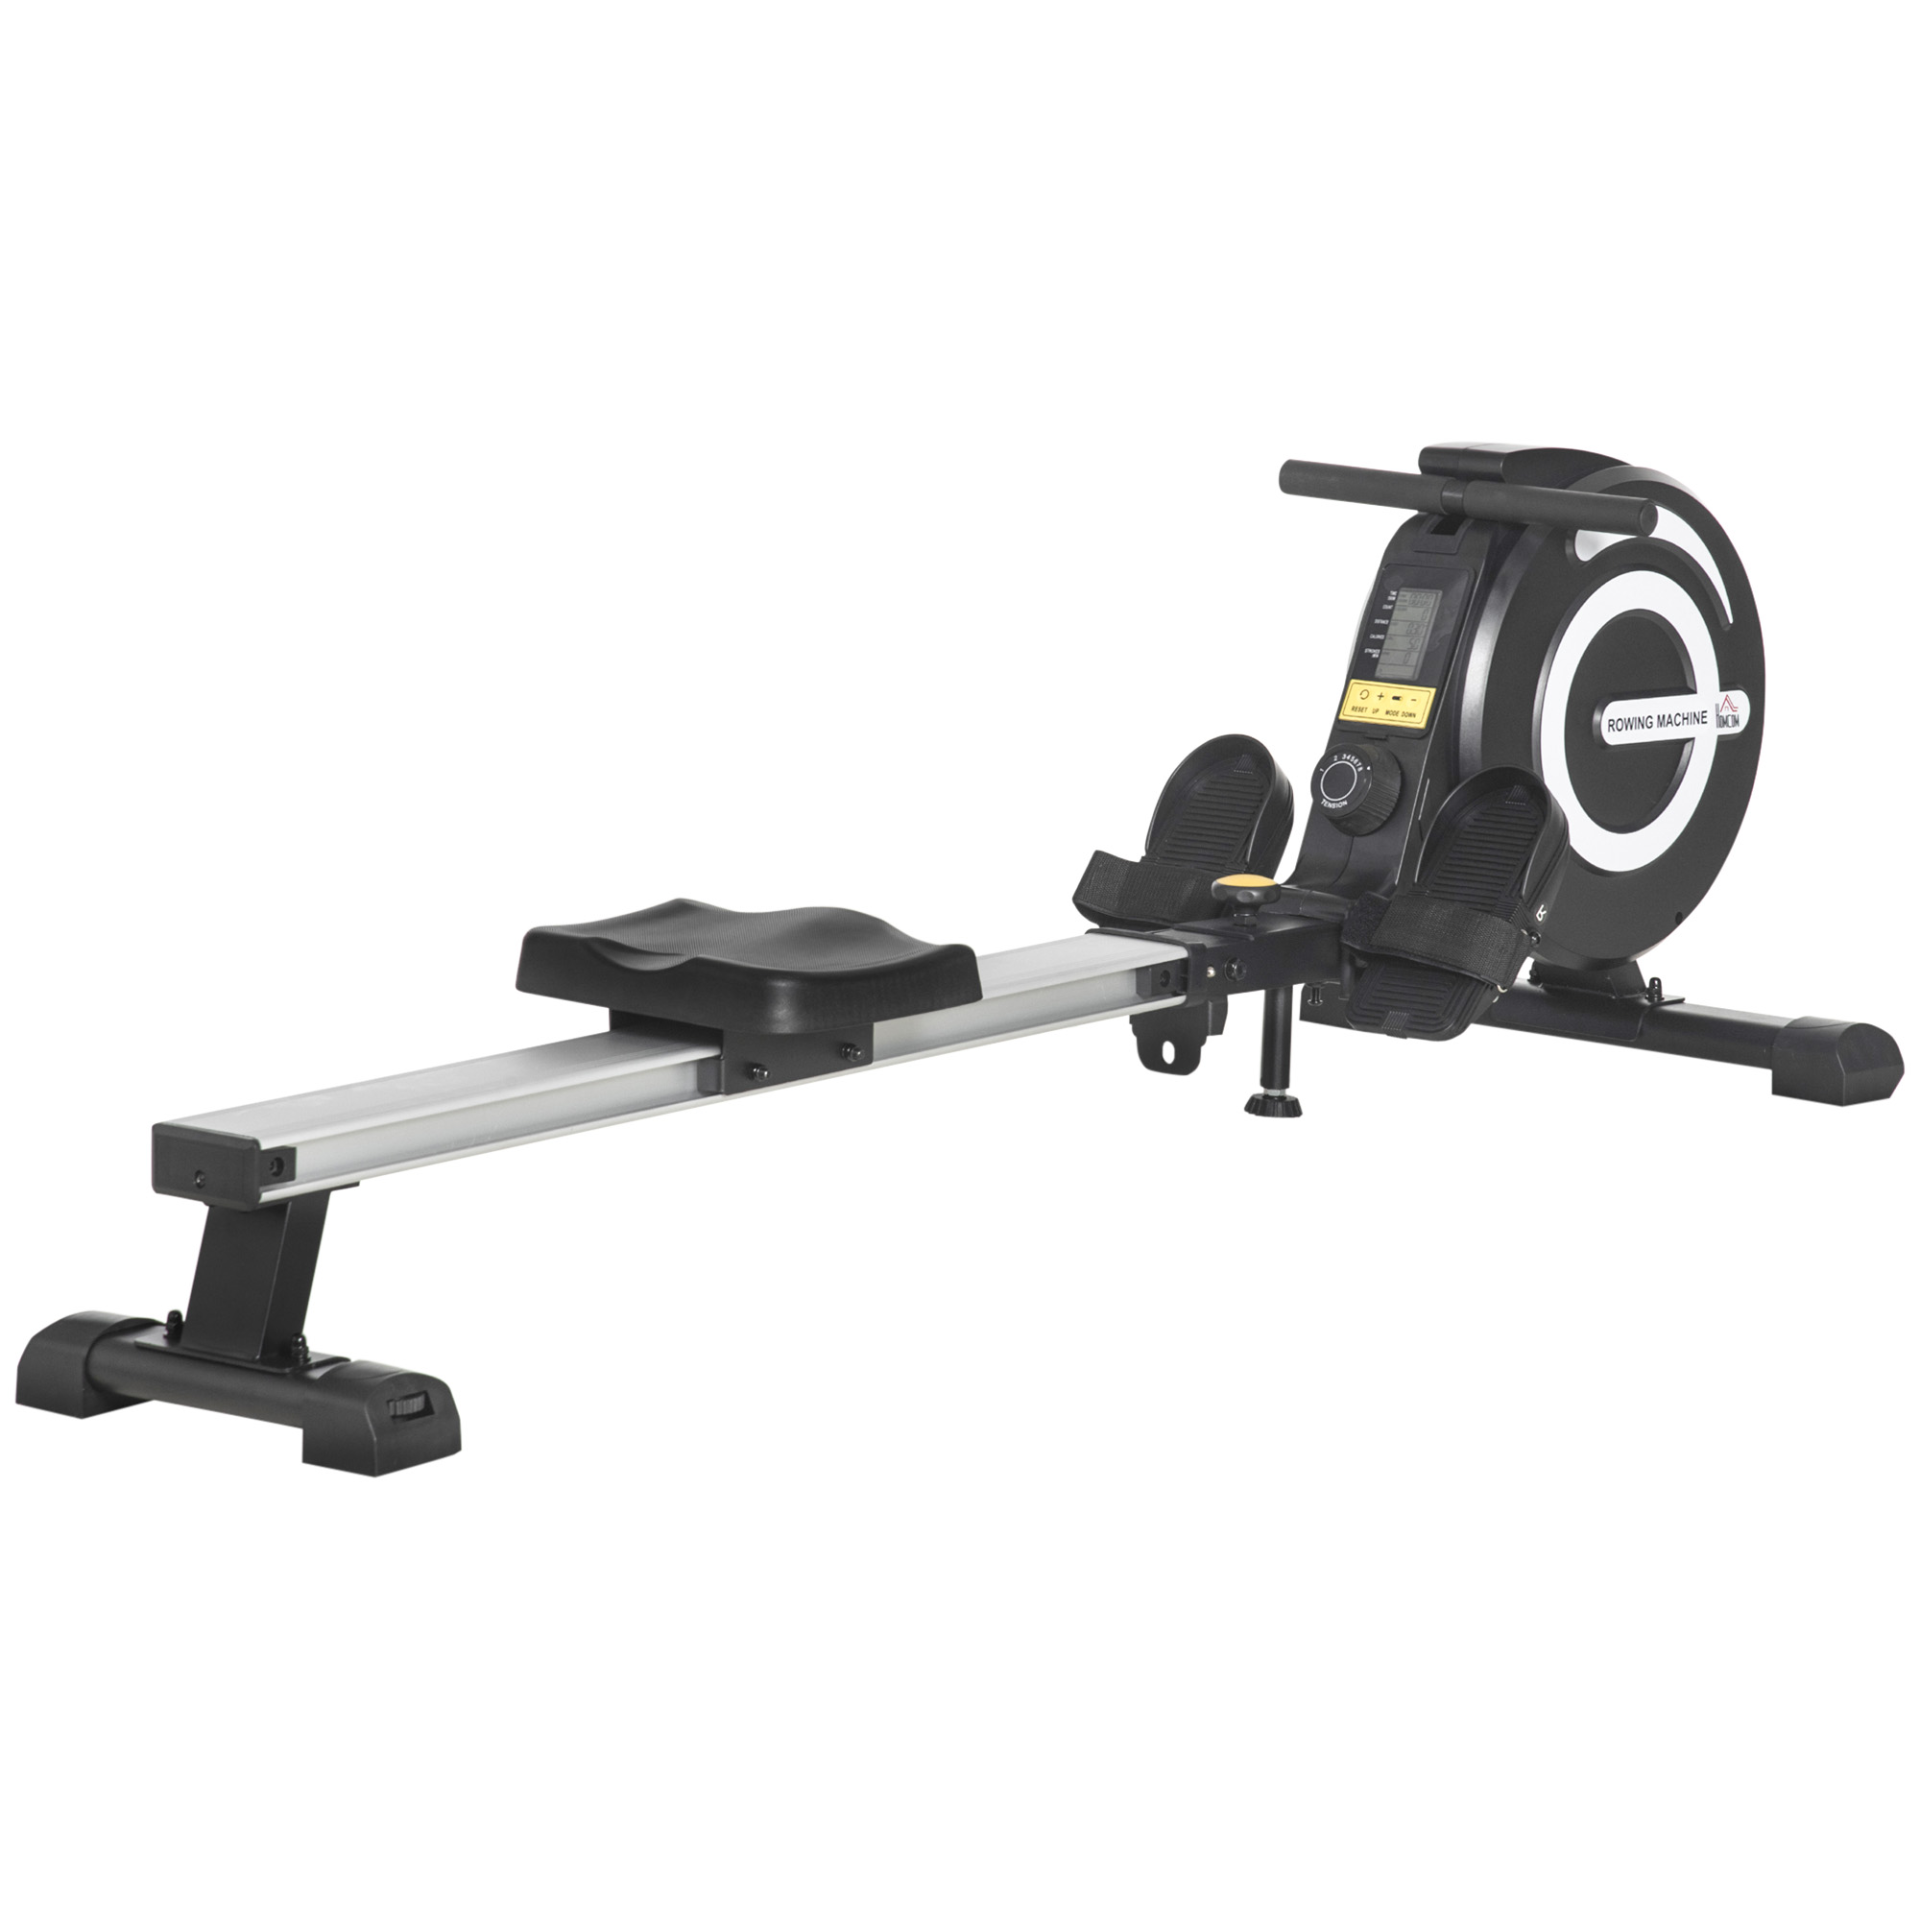 Indoor Body Health & Fitness Adjustable Magnetic Rowing Machine Rower with LCD D